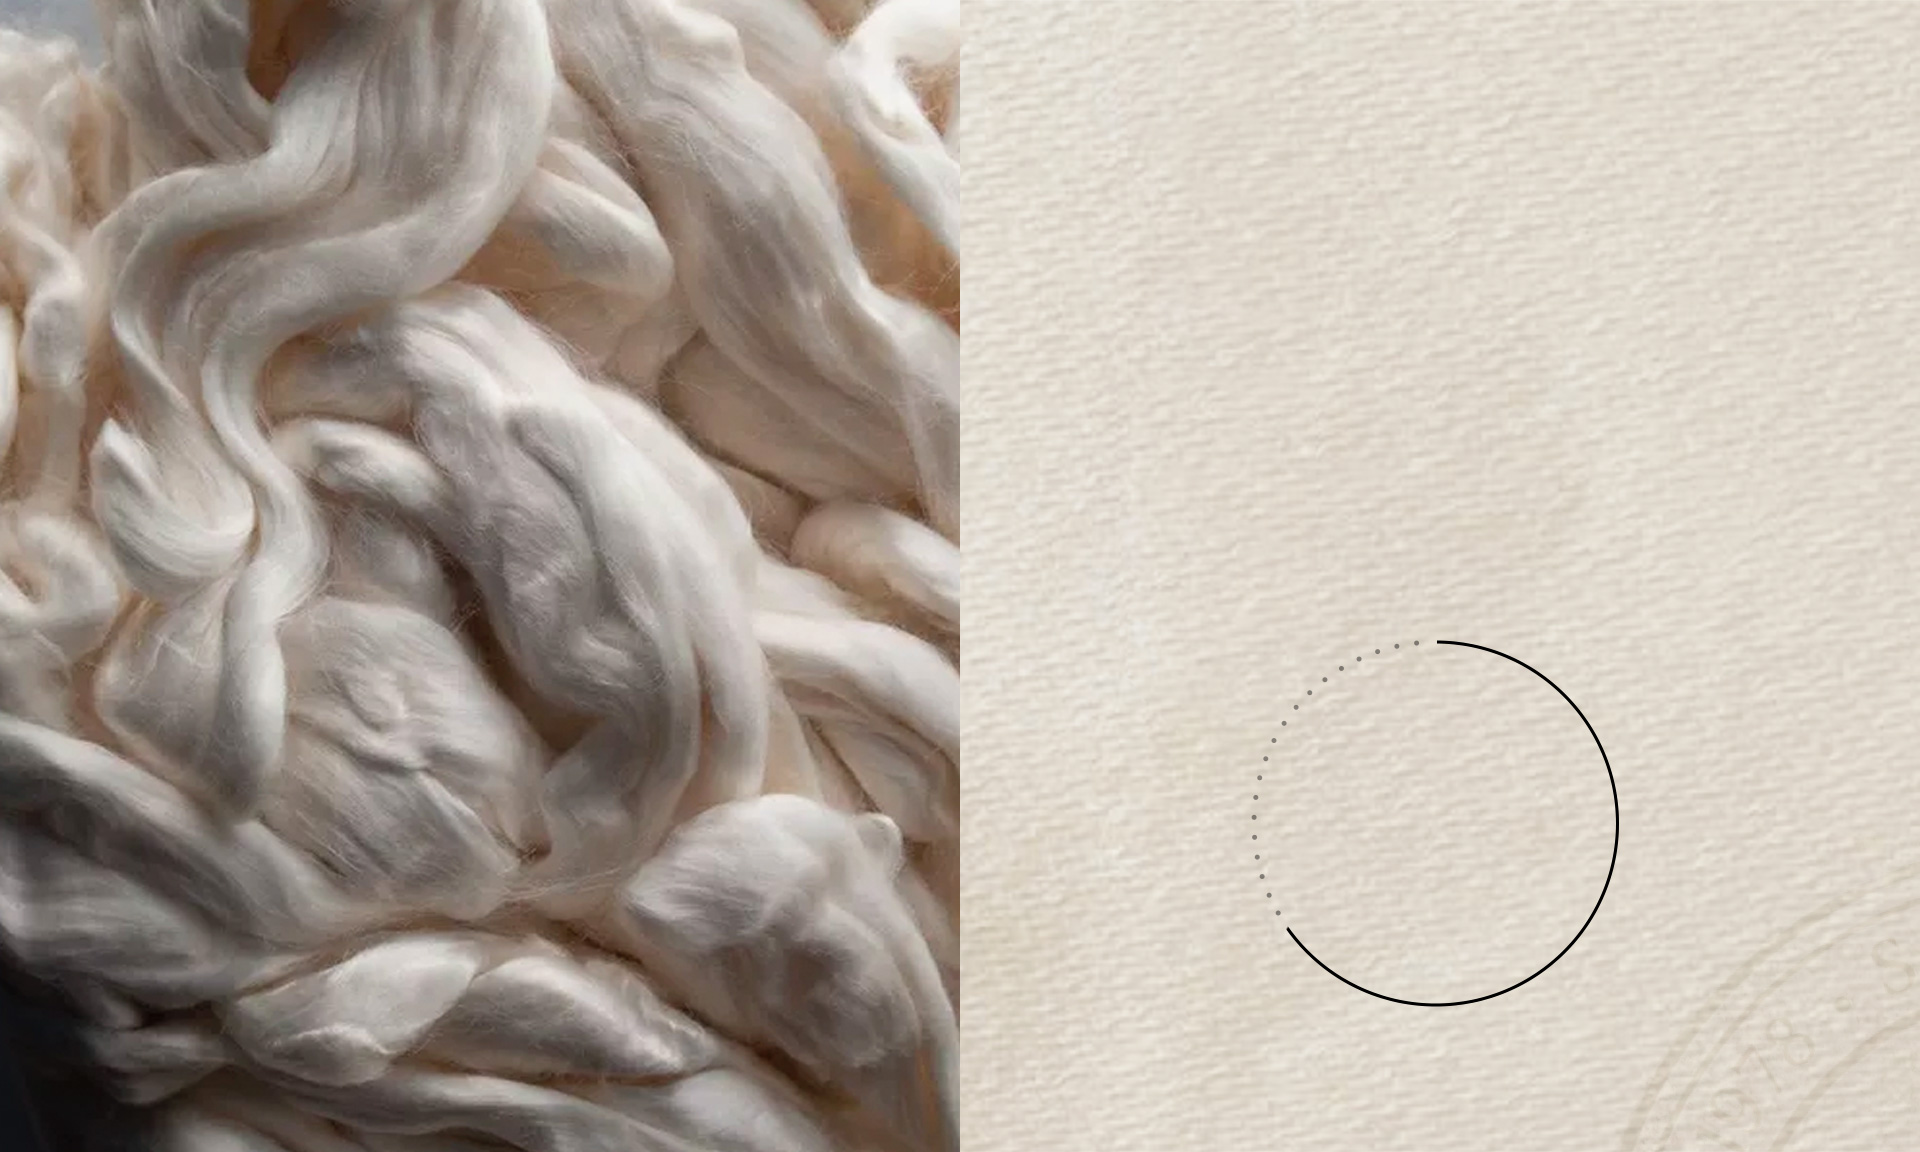 BY 2023 WE AIM TO USE 50% SUSTAINABLE FIBERS. Sourcing more sustainable cotton, partnering with CanopyStyle Compliant suppliers to source preferred man-made cellulosics.  Sourcing recycled and responsible wool from vendors that are compliant under the Responsible Wool Standards; linen and recycled polyester. 65% of our goal